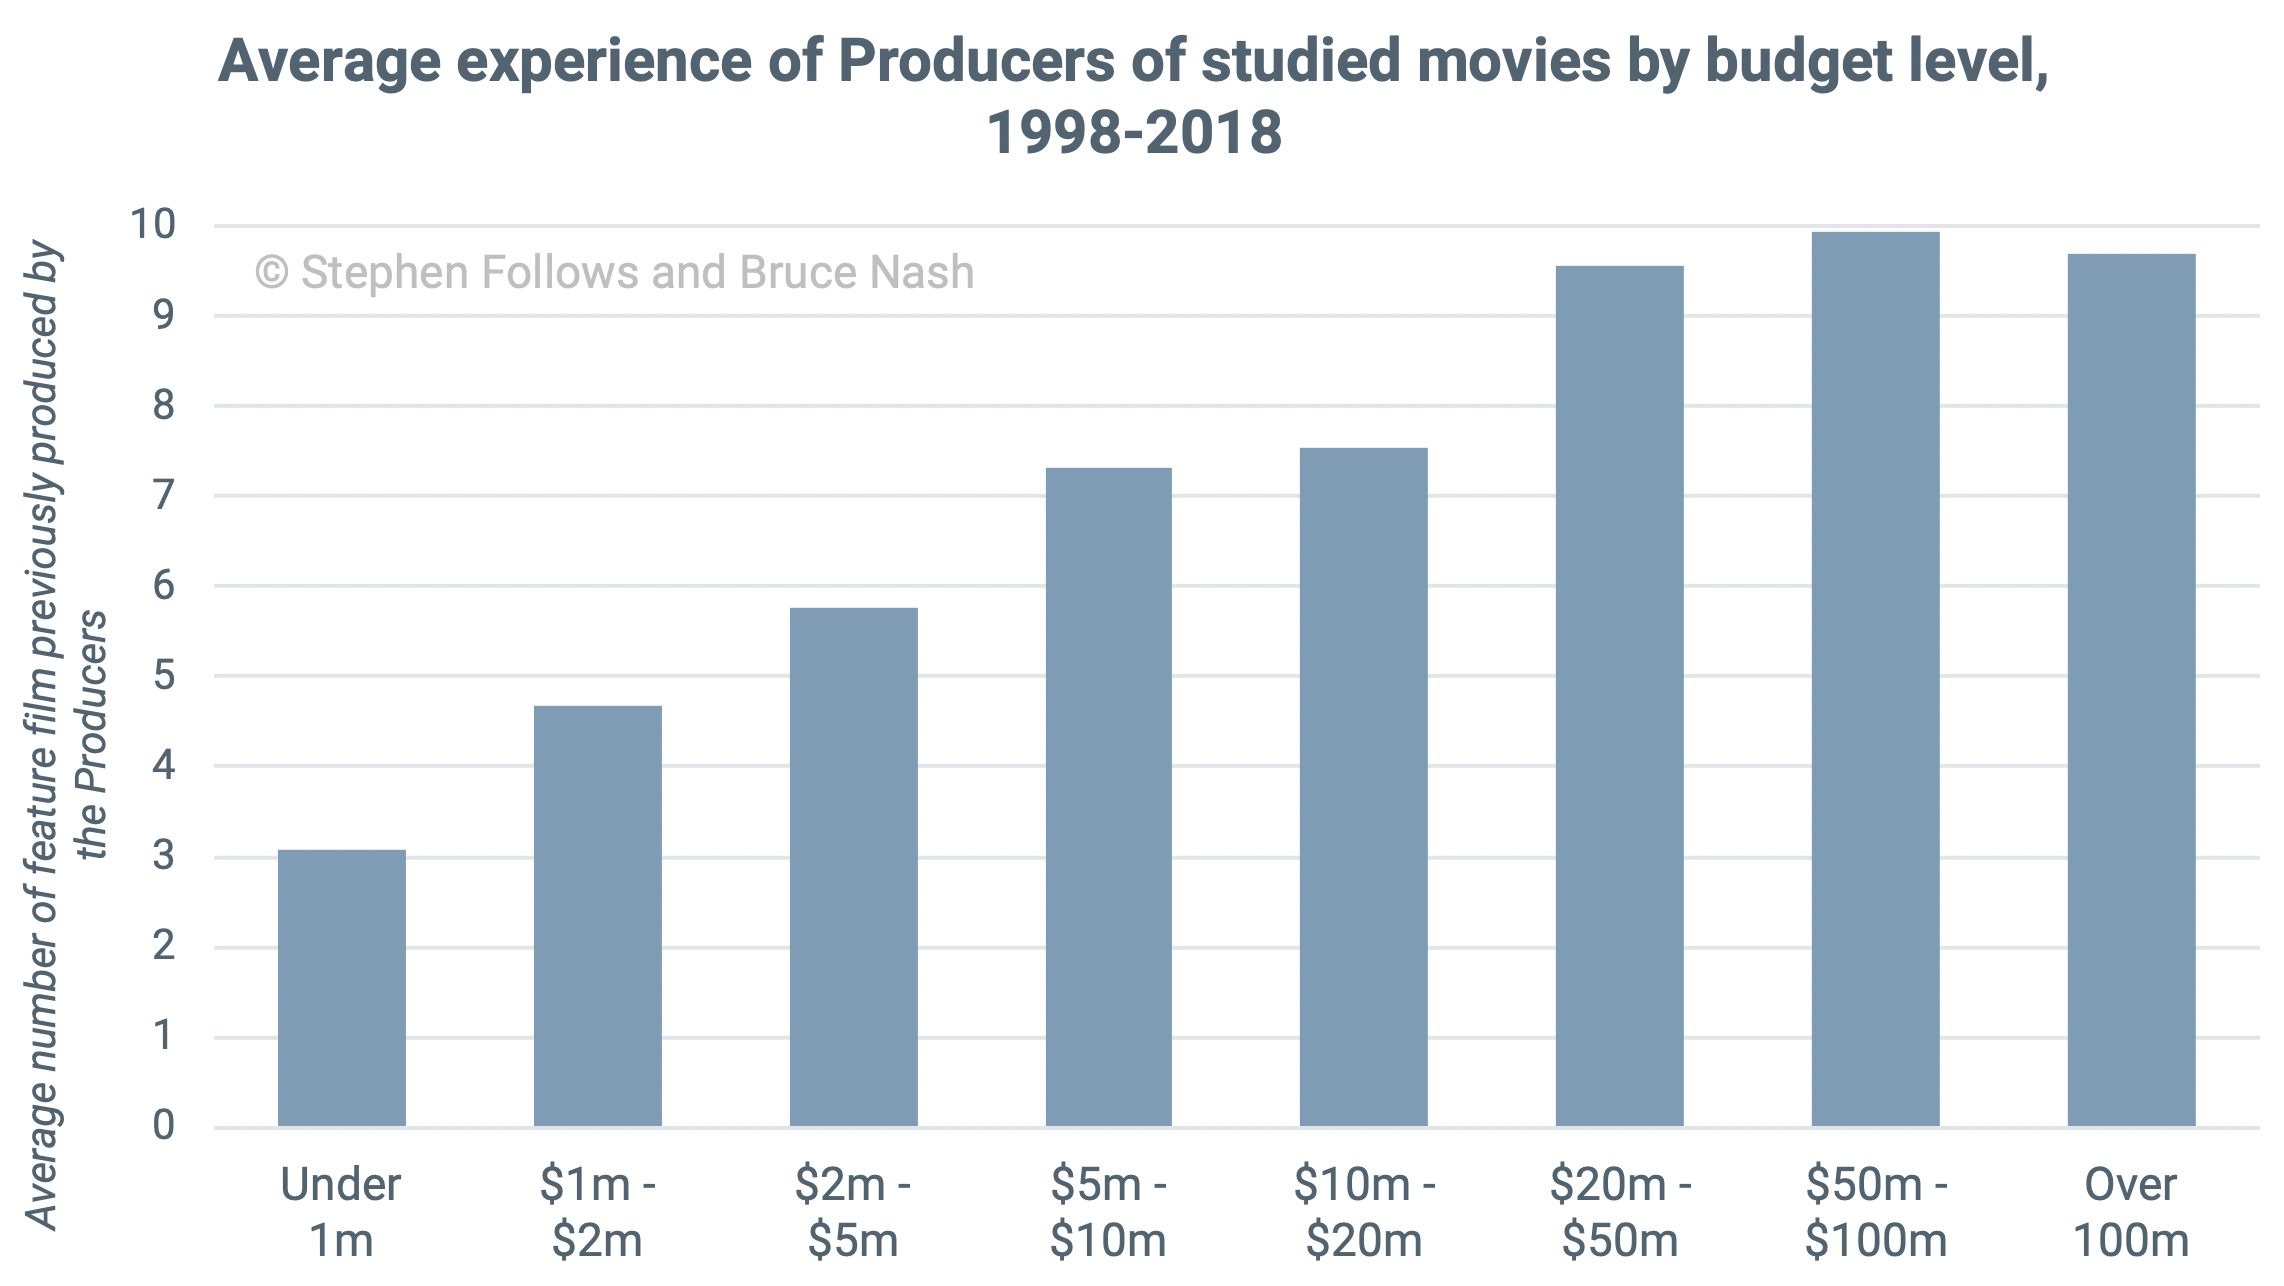 Average experience of Producers of studied movies by budget level, 1998-2018